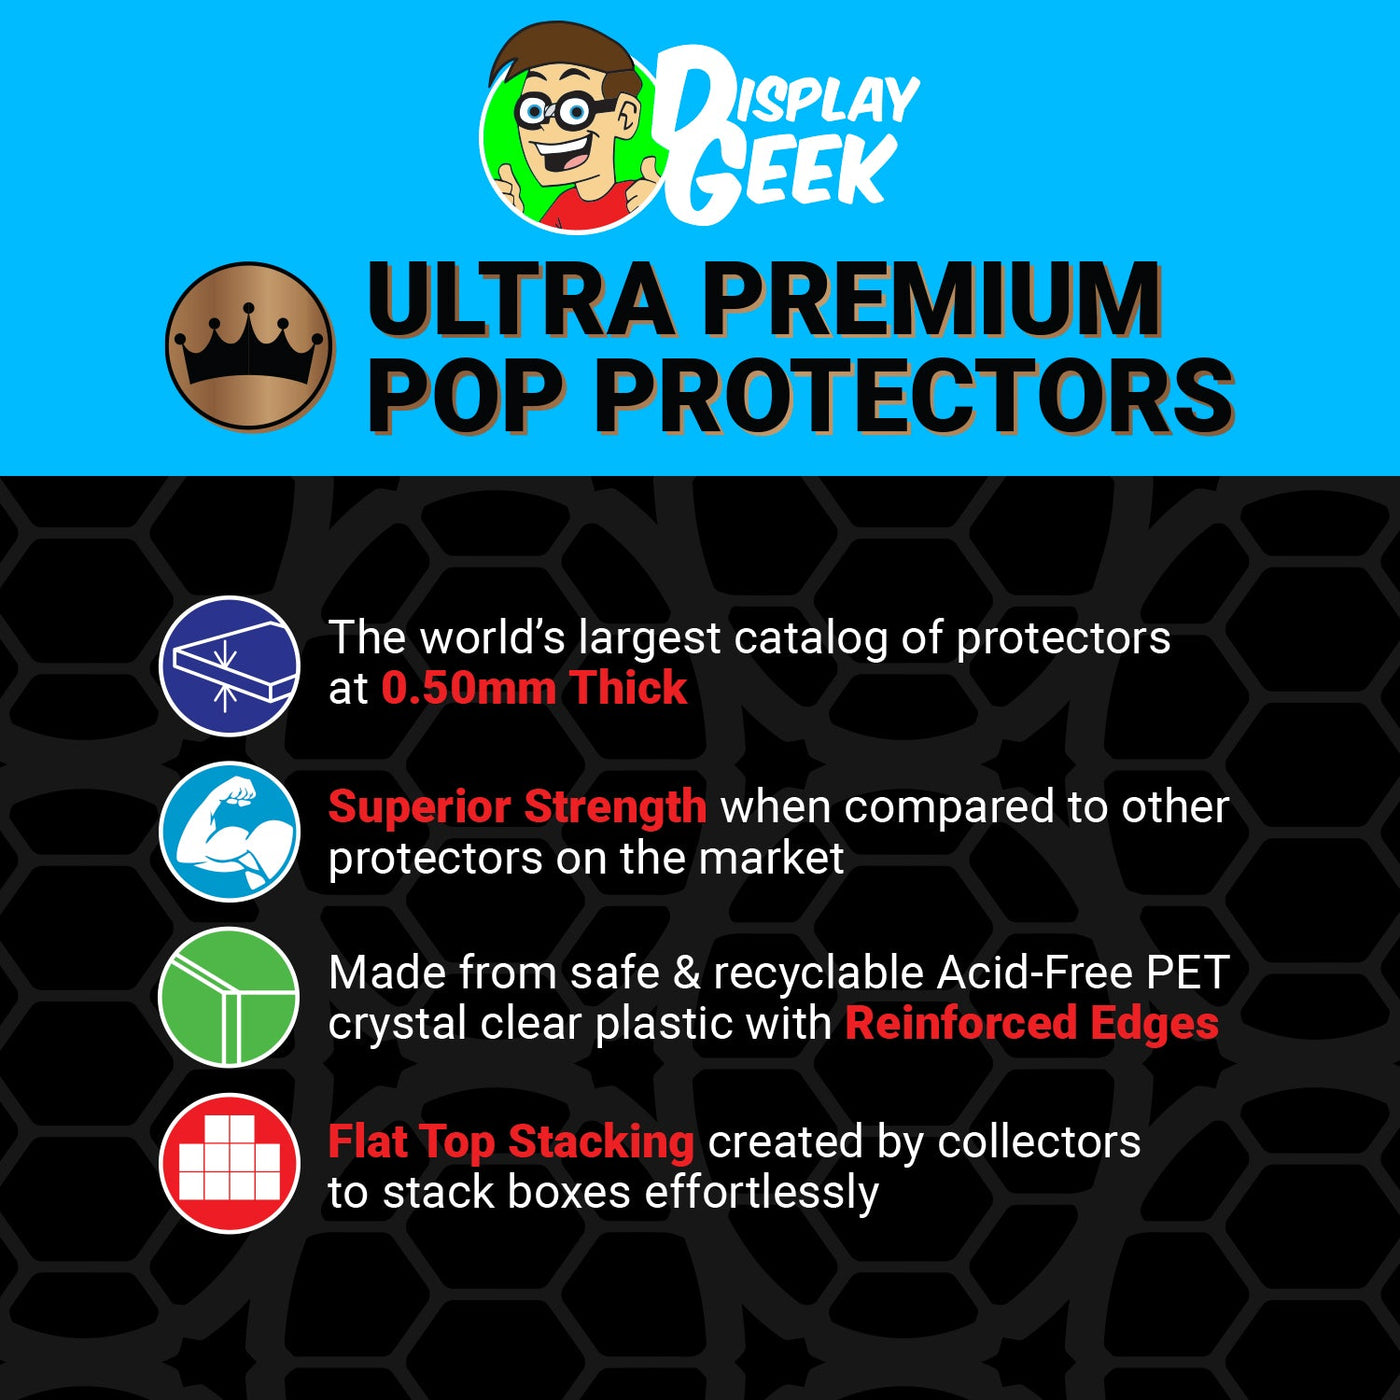 Pop Protector for Freddy Funko as Iron Man SDCC LE 144 on The Protector Guide App by Display Geek